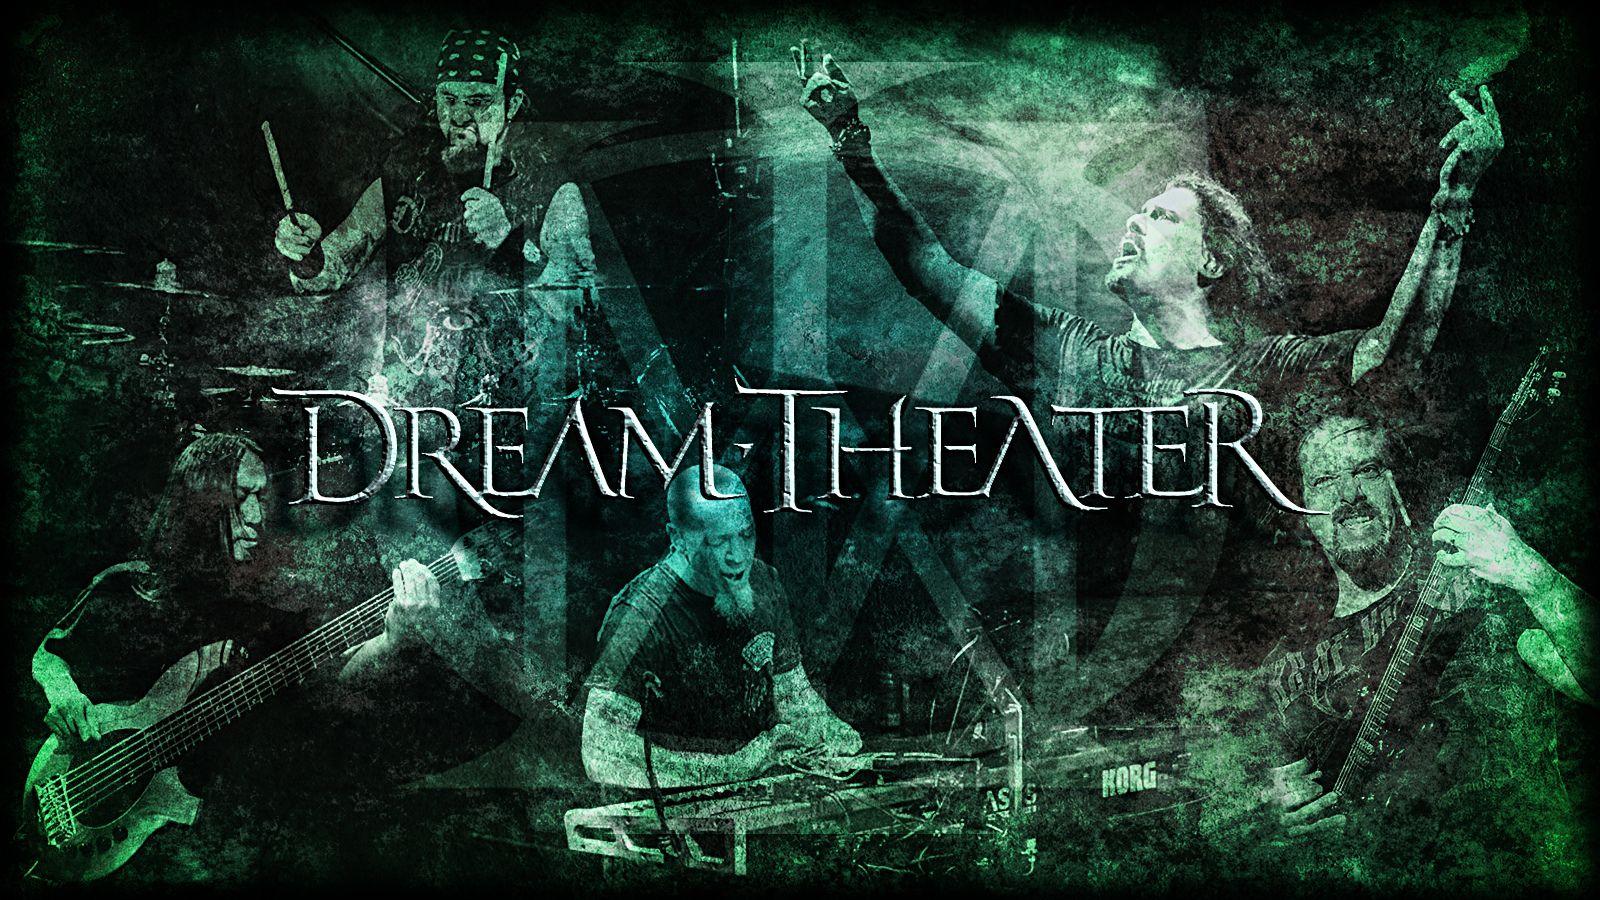 Dream theater Wallpaper HD 67 images